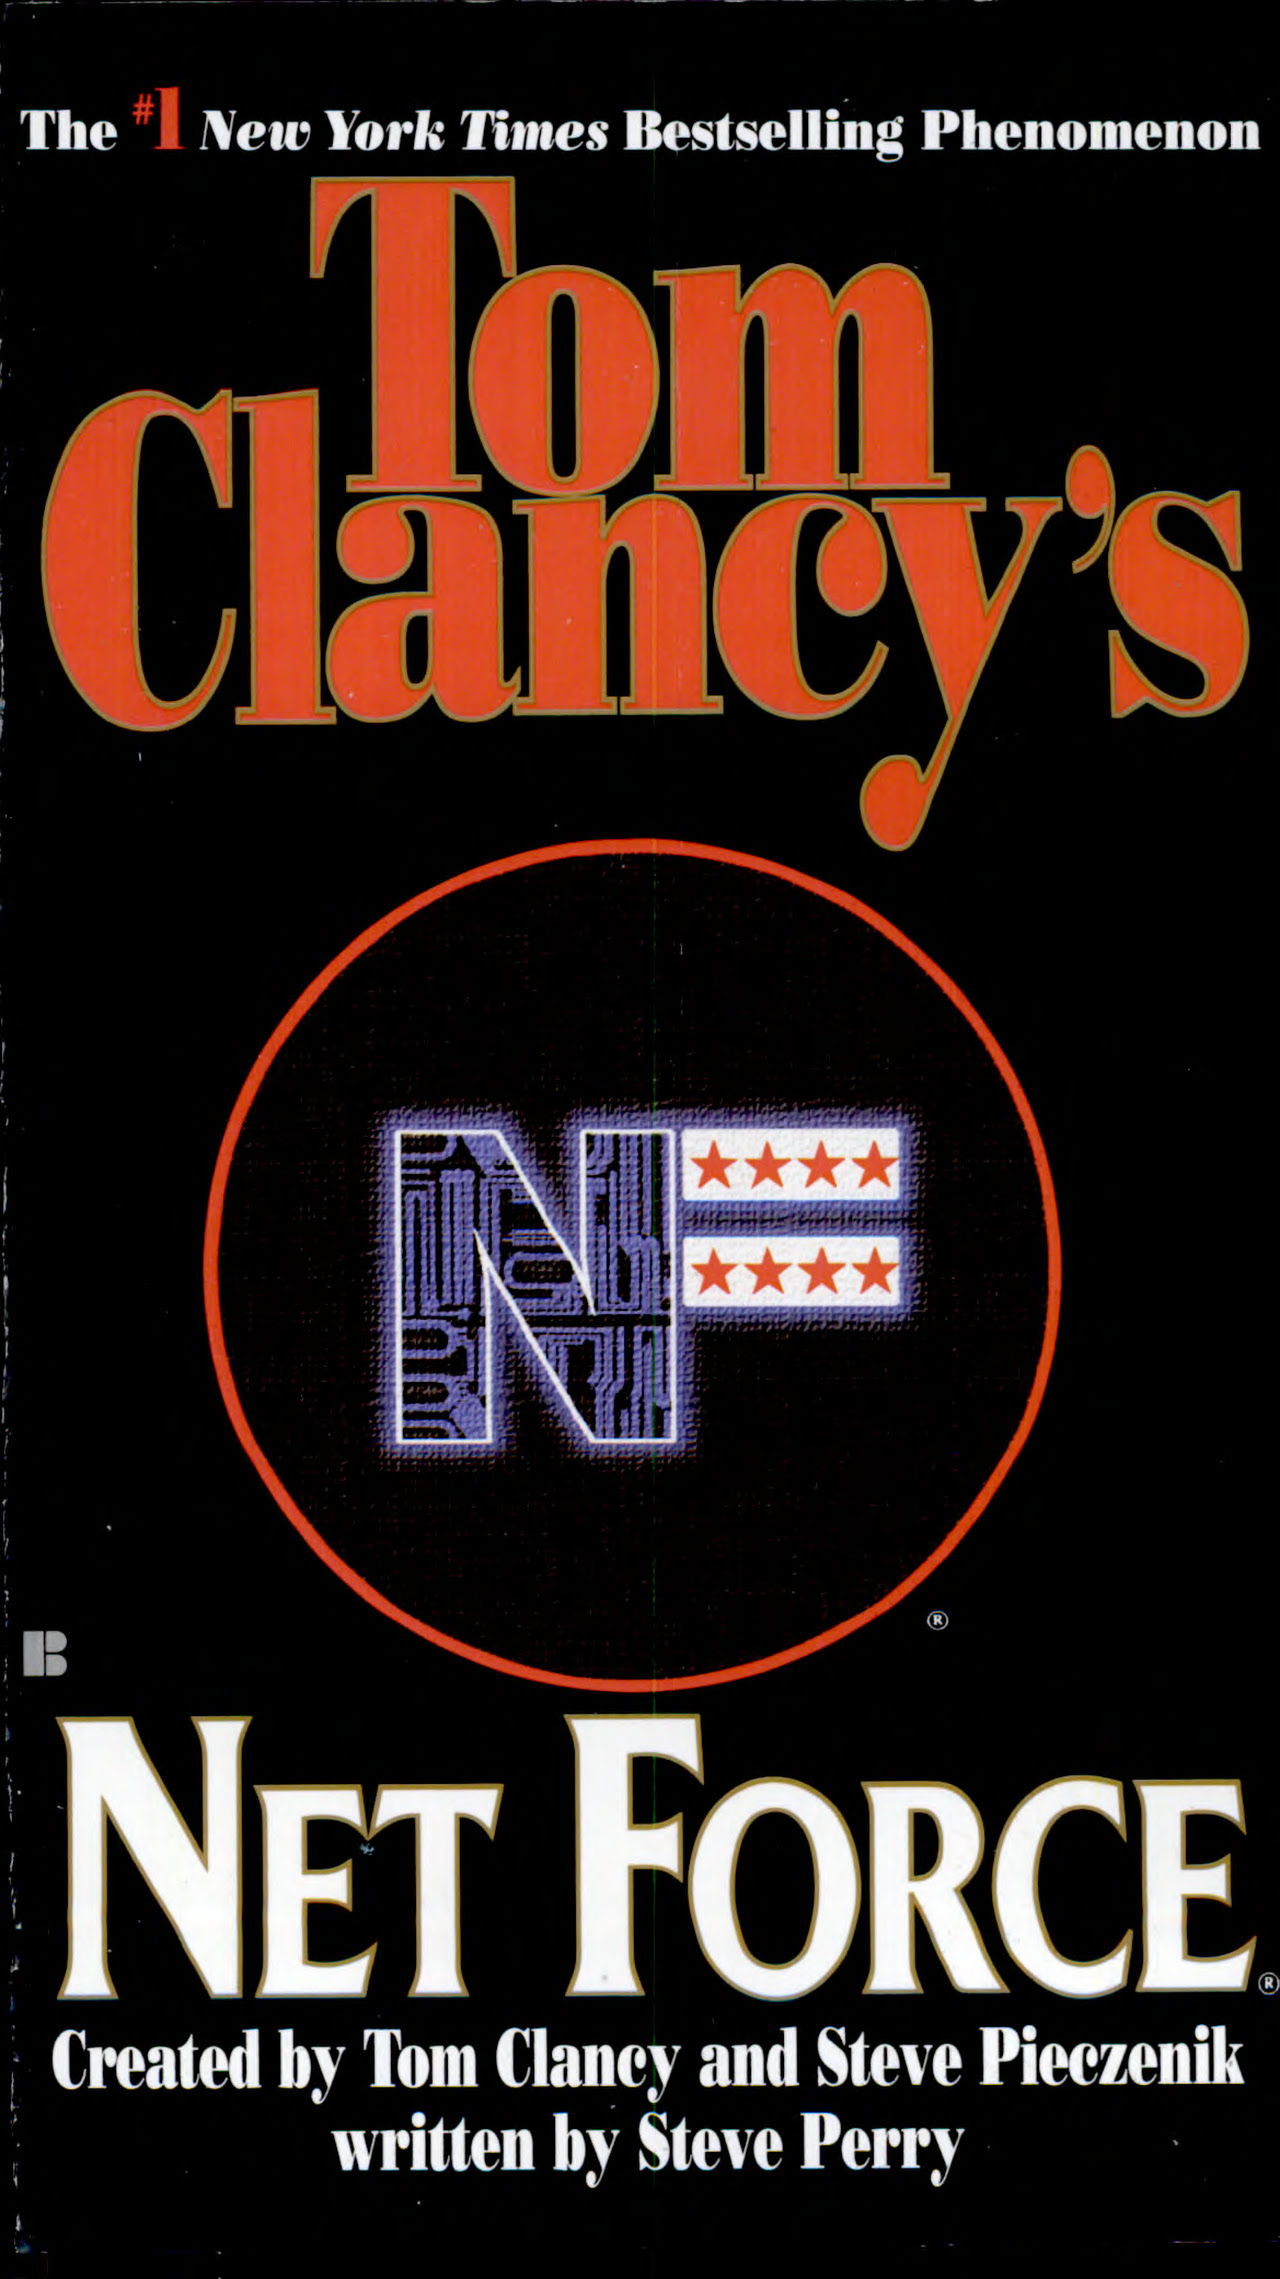 Net Force - (1998 book), by Tom Clancy image